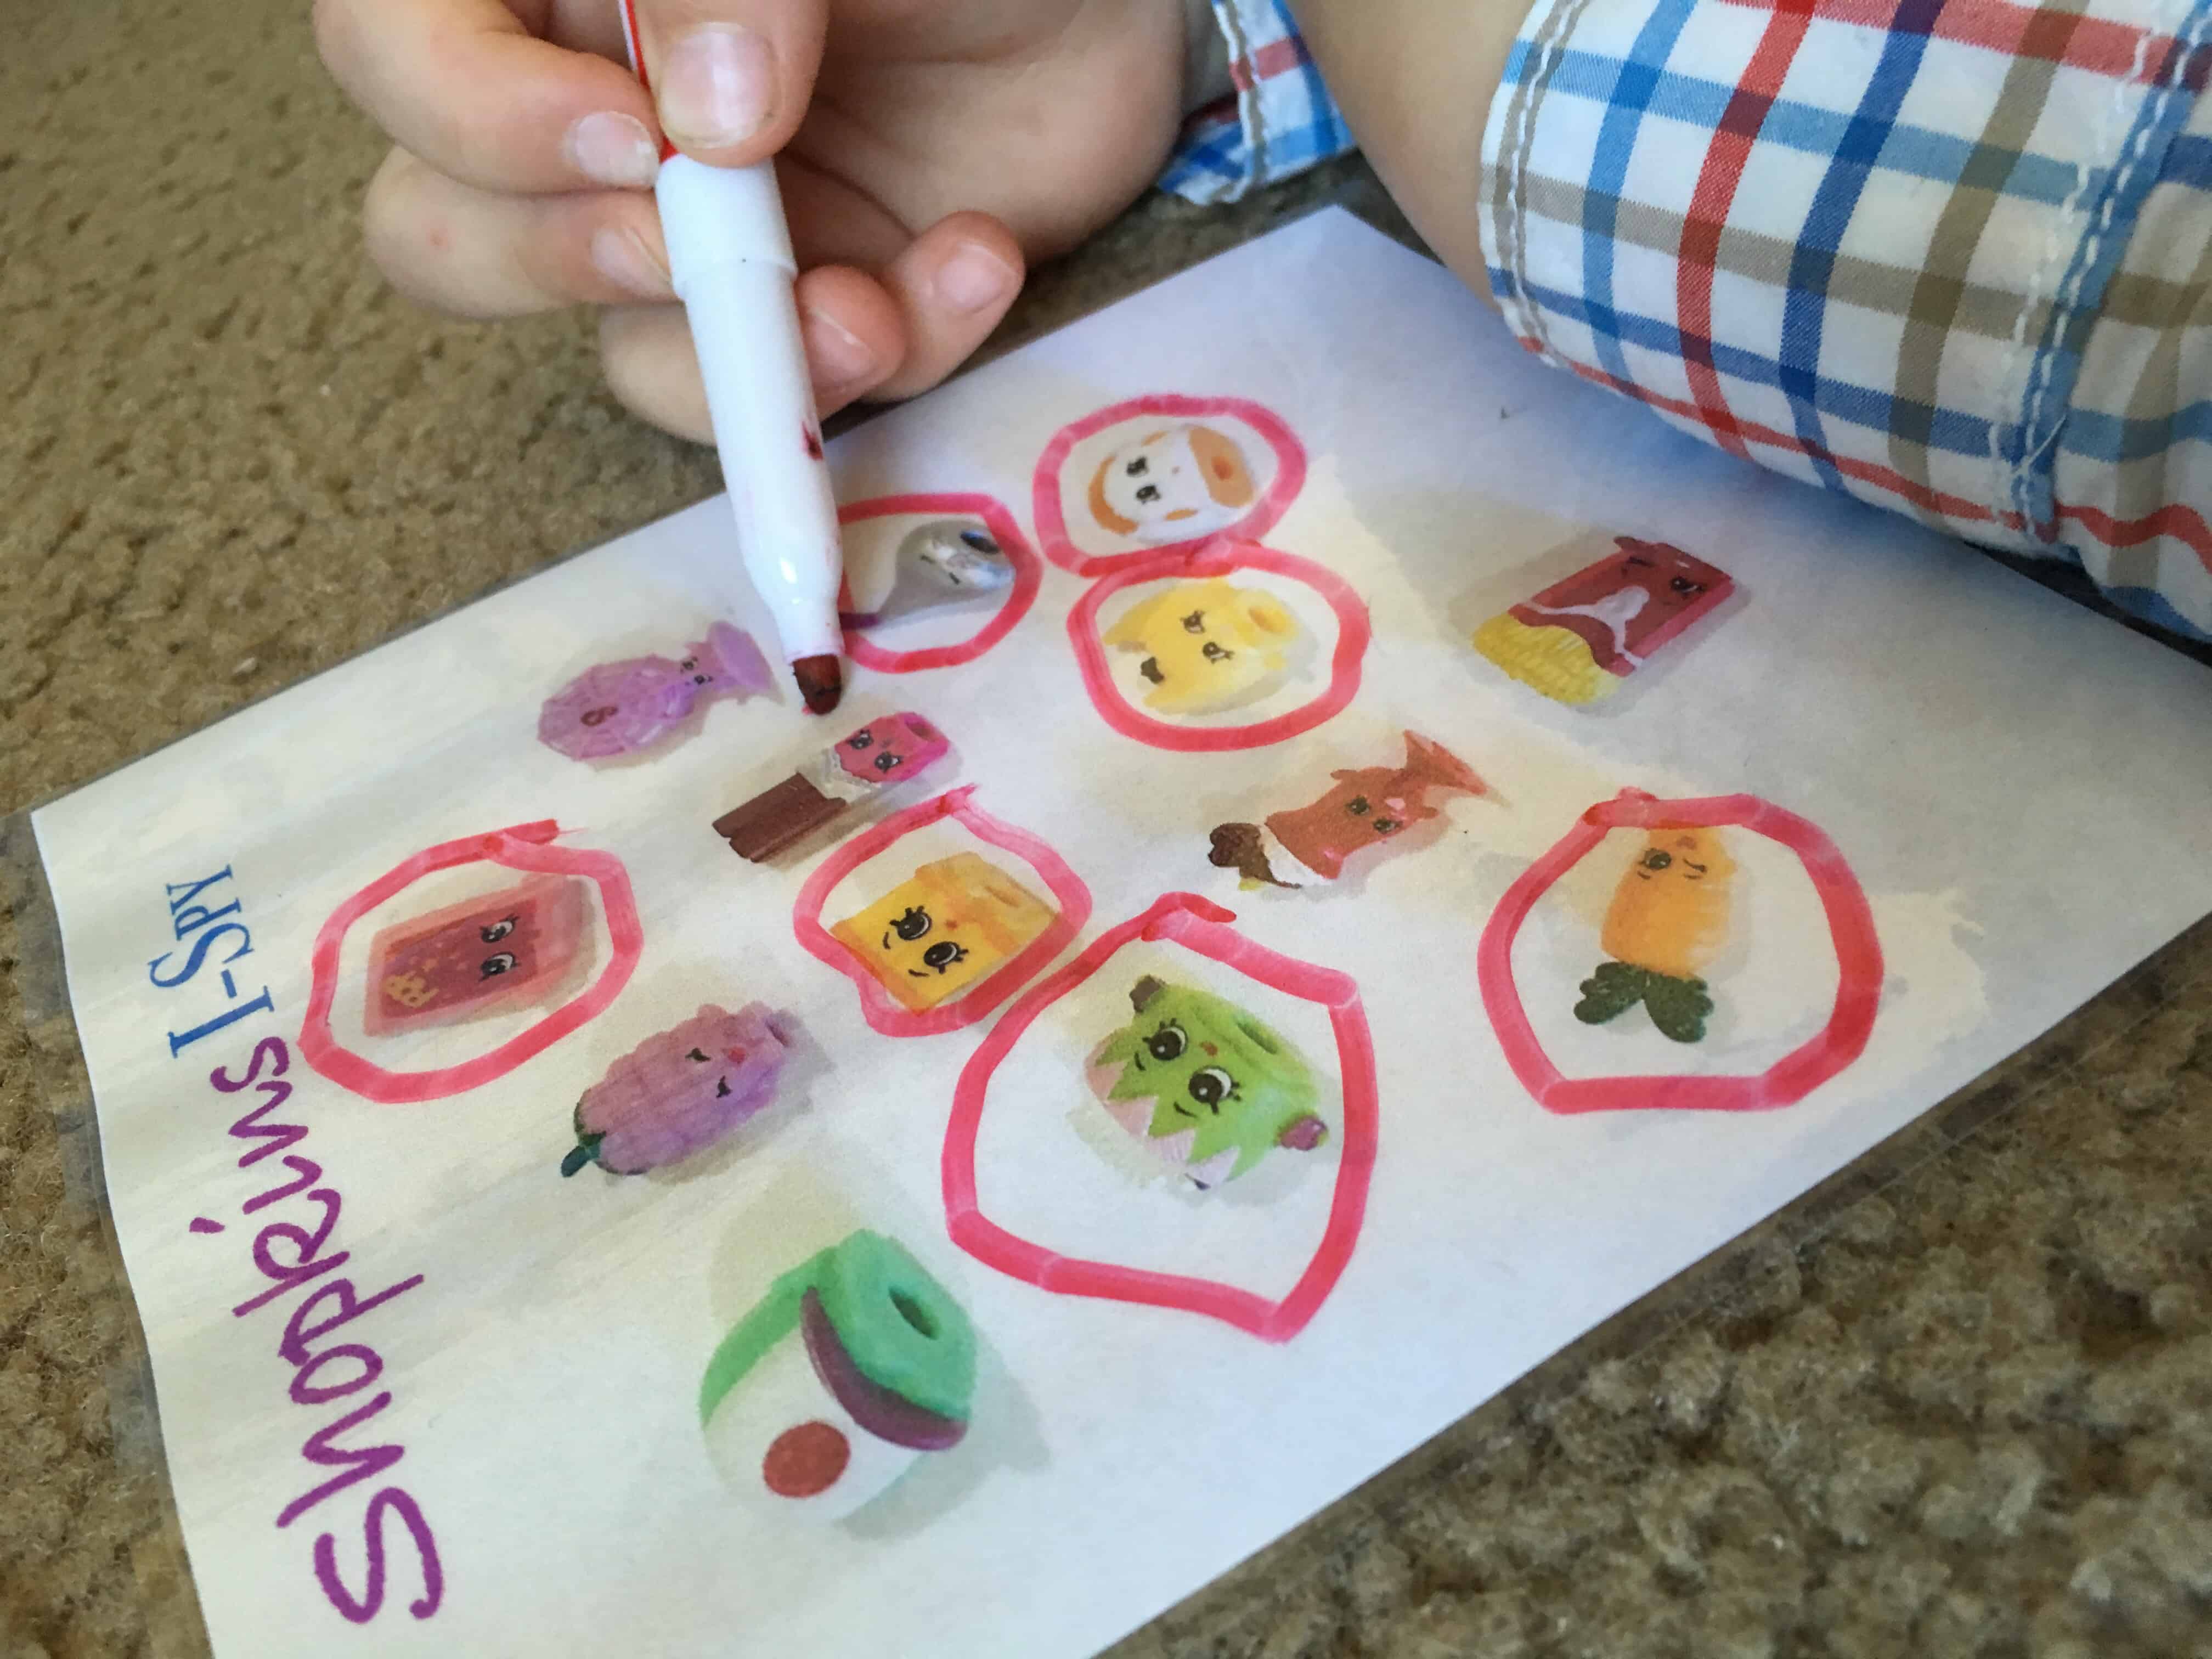 This Shopkins I Spy bag will keep all of the surprise egg lovers SUPER happy! A great sensory, and fine motor tool that will keep the kids BUSY.